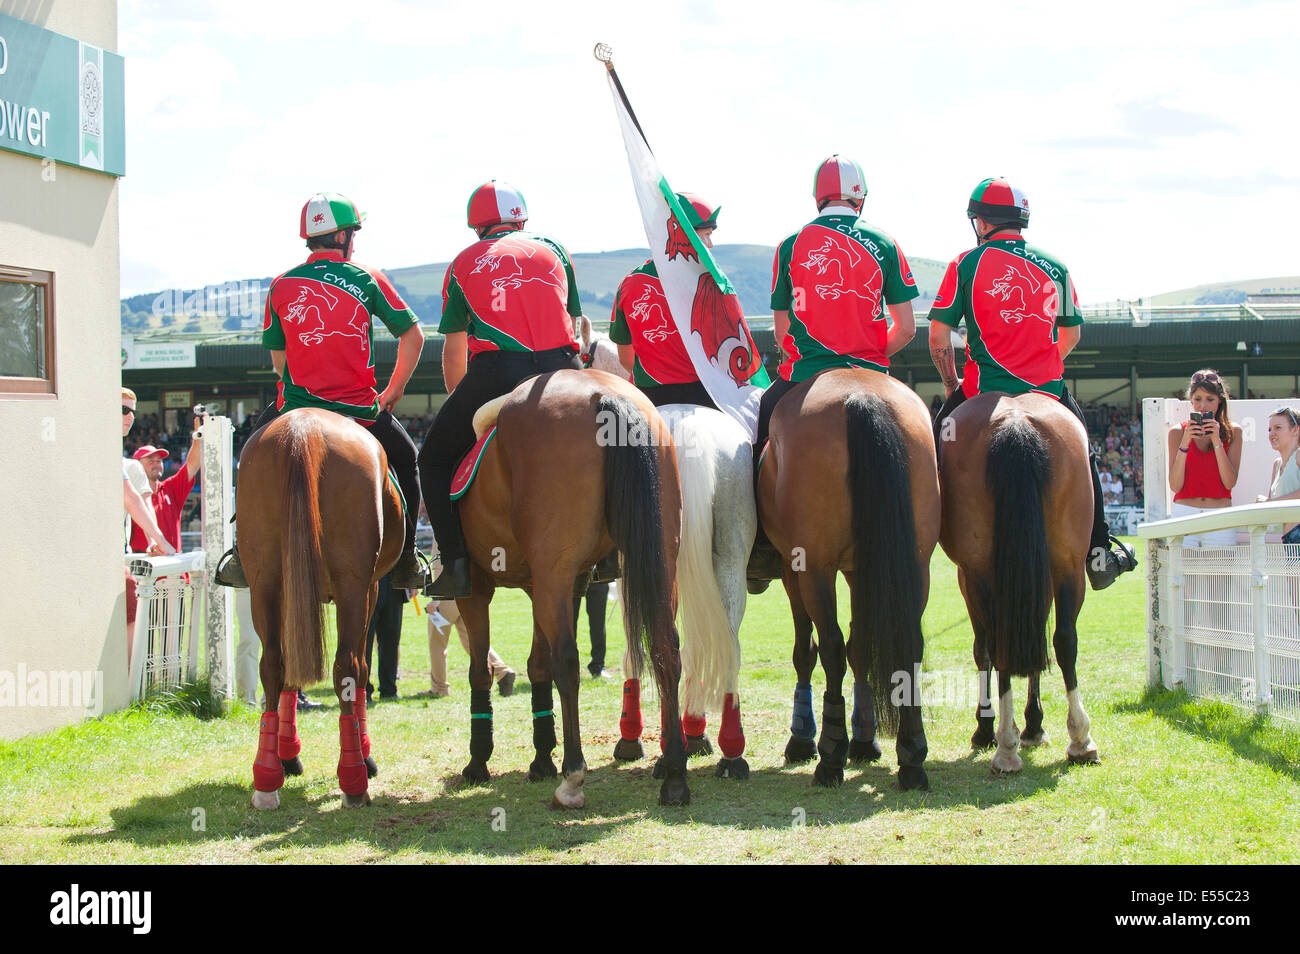 Llanelwedd, UK. 21st July 2014. Team Wales make their way to the Main Ring for The Royal Welsh Mounted Games. A record numbers of visitors in excess of 240,000 are expected this week over the four day period of Europe’s largest agricultural show. Livestock classes and special awards have attracted 8,000 plus entries, 670 more than last year. The first ever Royal Welsh Show was at Aberystwyth in 1904 and attracted 442 livestock entries. Credit:  Graham M. Lawrence/Alamy Live News. Stock Photo